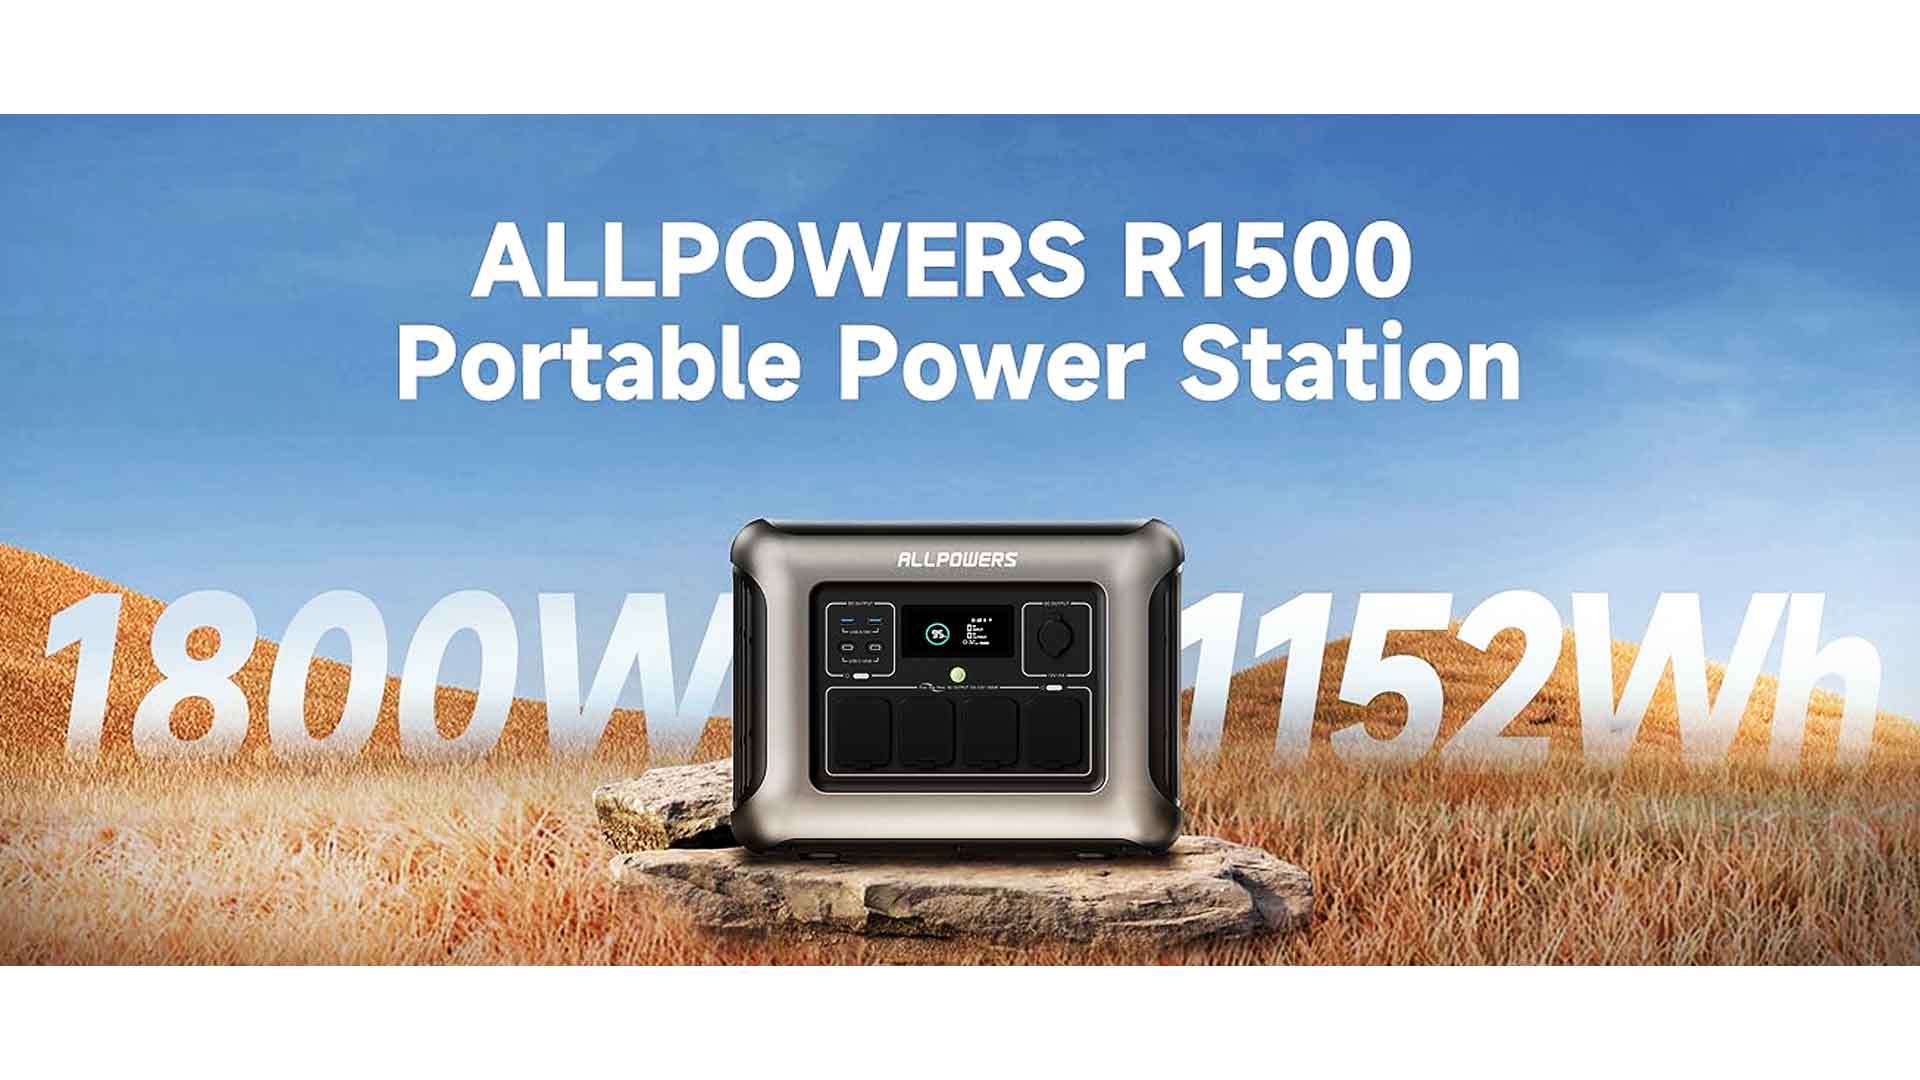 ALLPOWERS R1500 power station